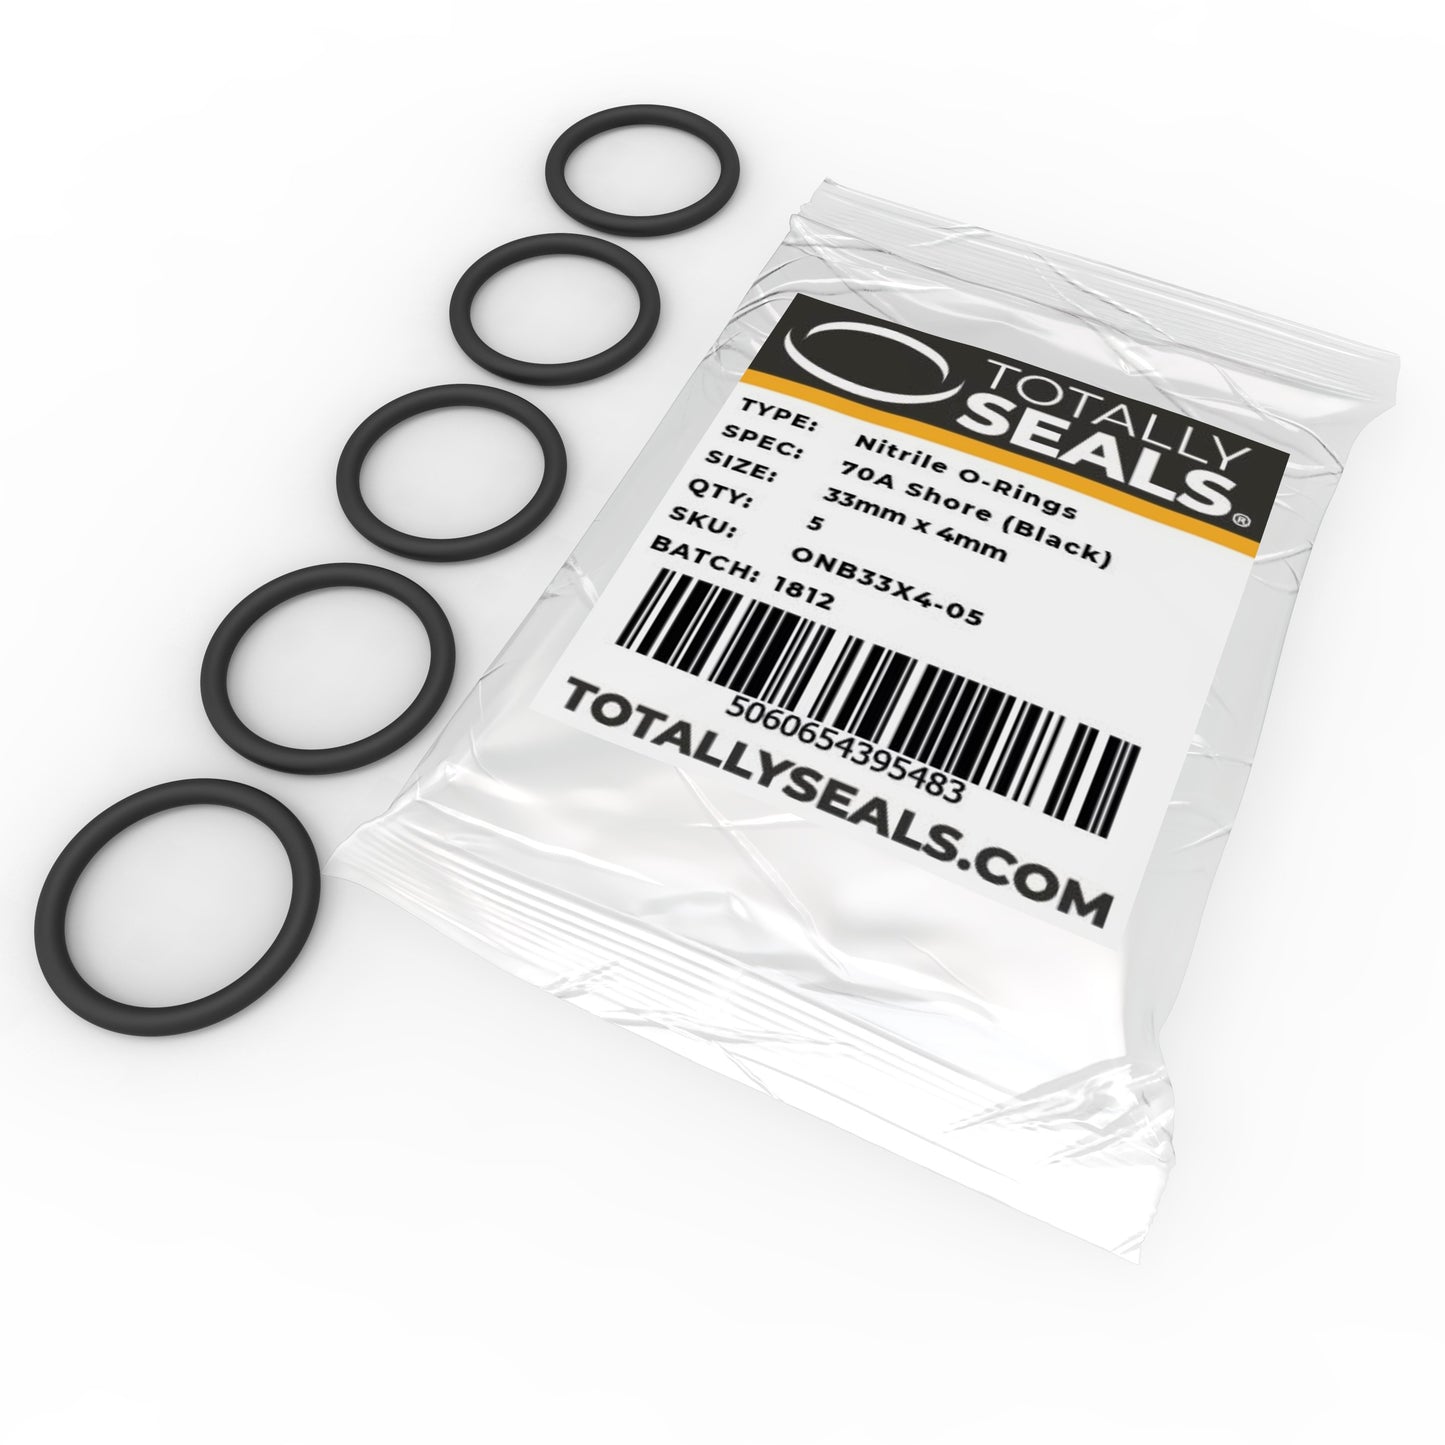 33mm x 4mm (41mm OD) Nitrile O-Rings - Totally Seals®